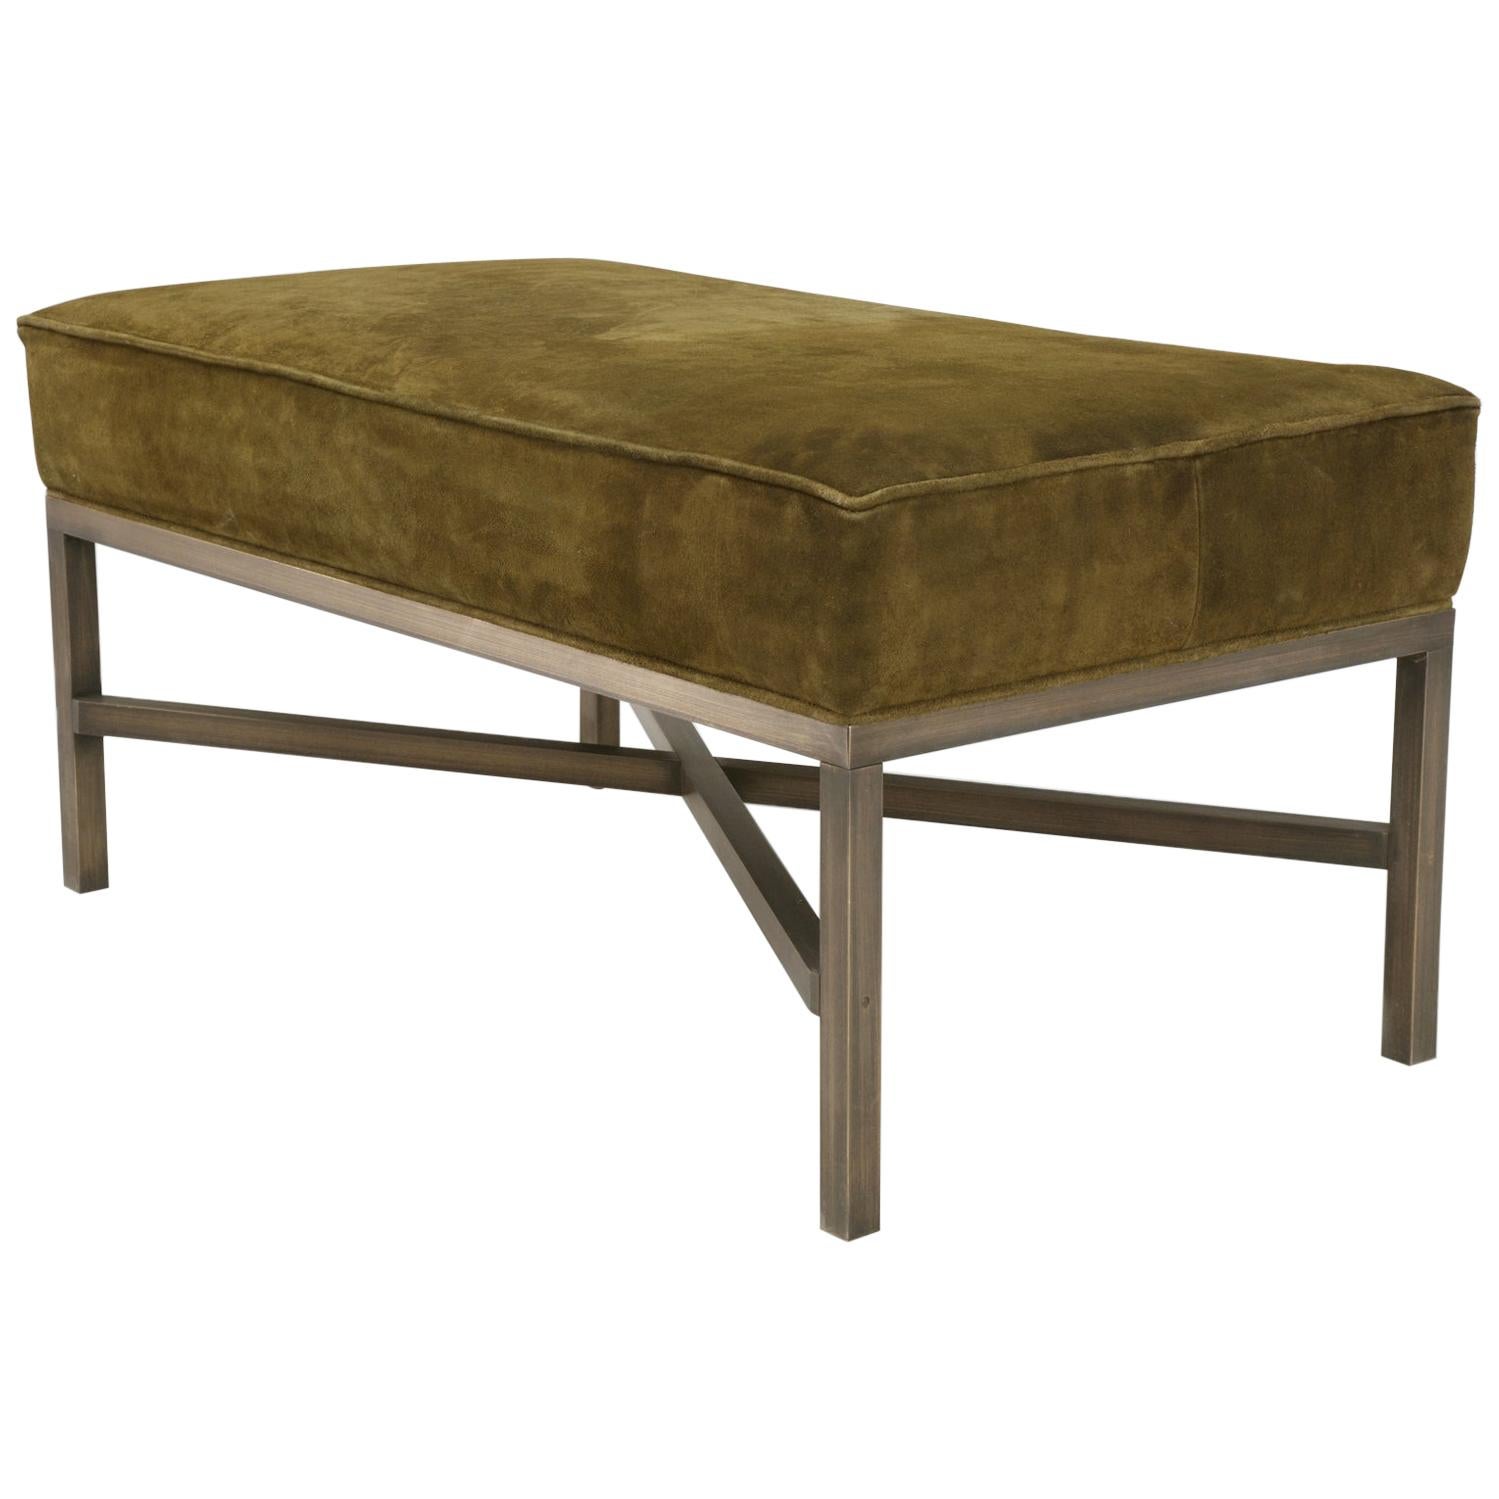 Custom Handmade in Chicago Bronze Bench or Ottoman in Any Dimension or Finish